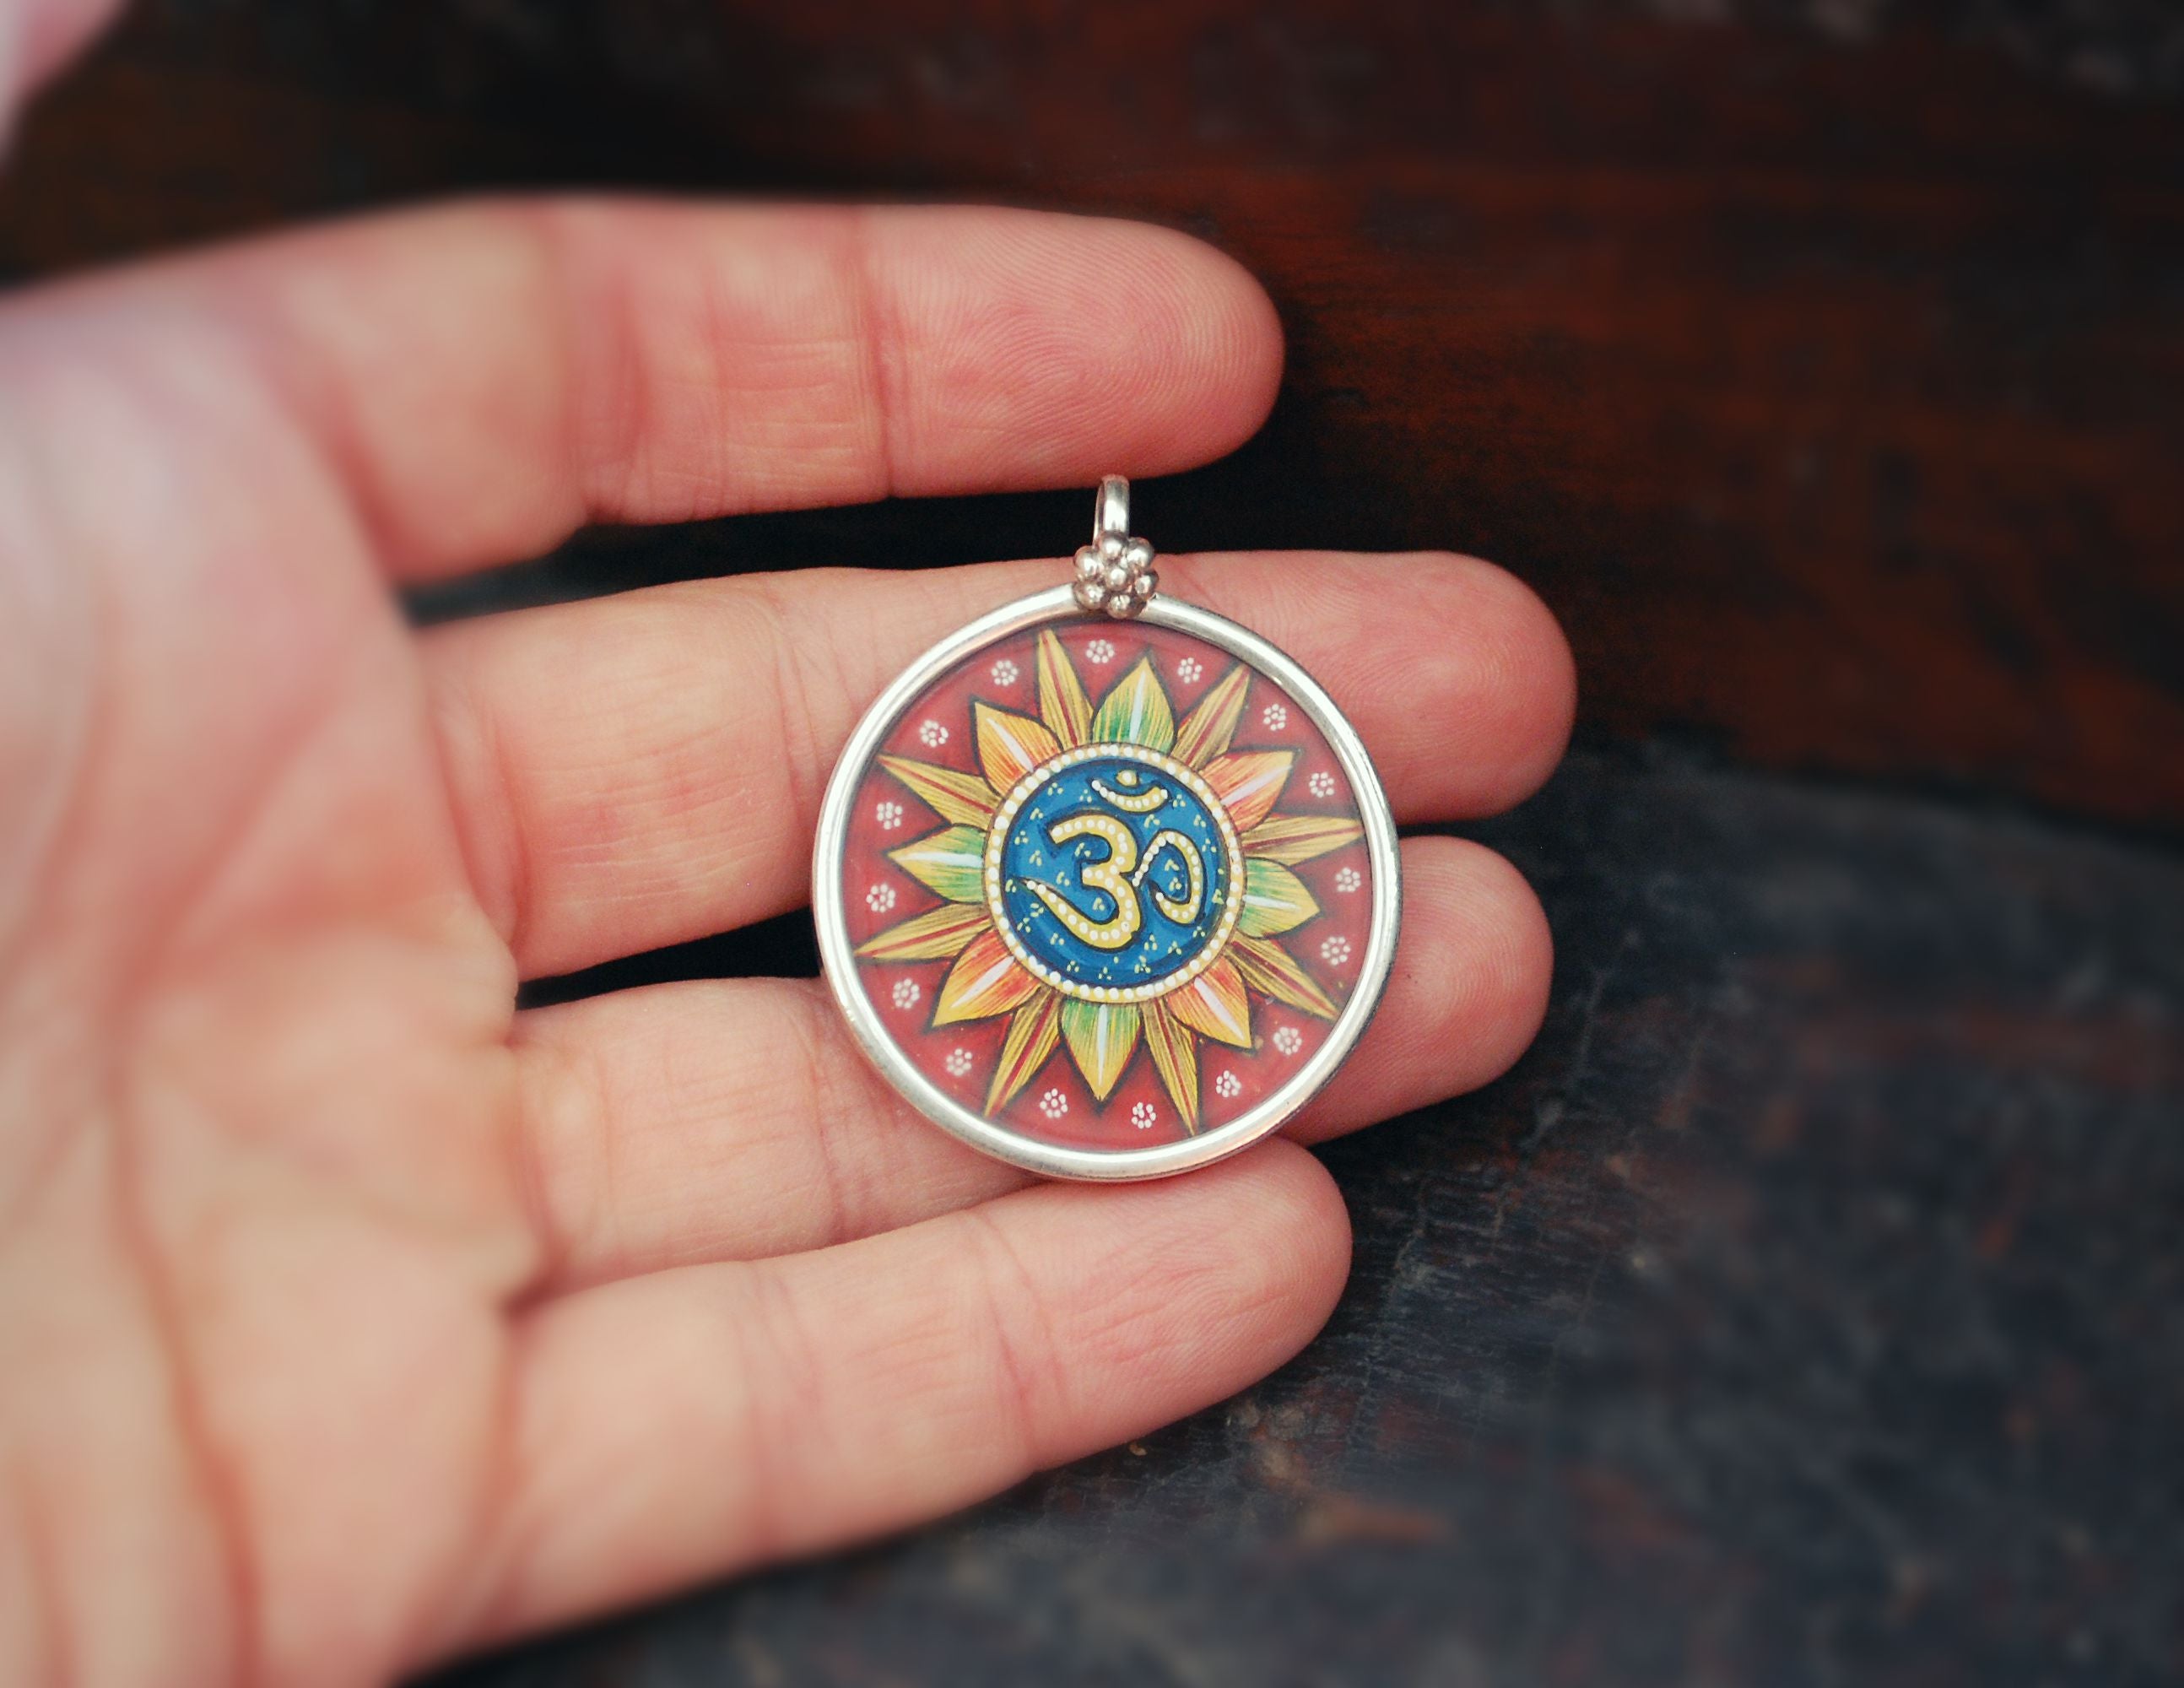 Indian Om Painted Pendant